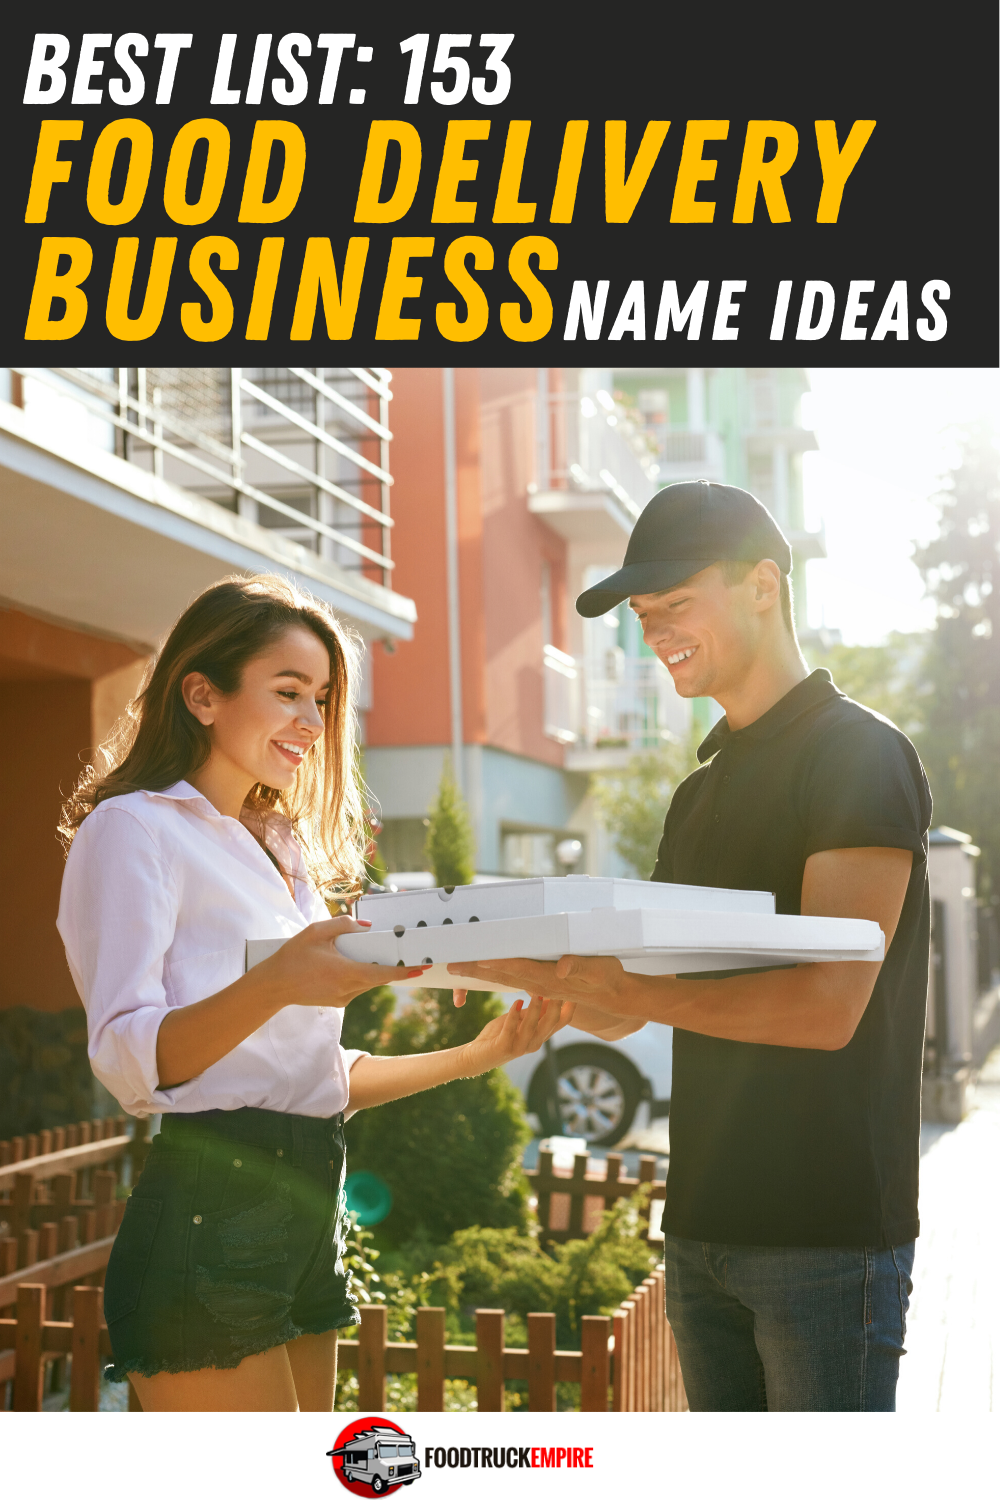 Best List: 153 Food Delivery Business Name Ideas